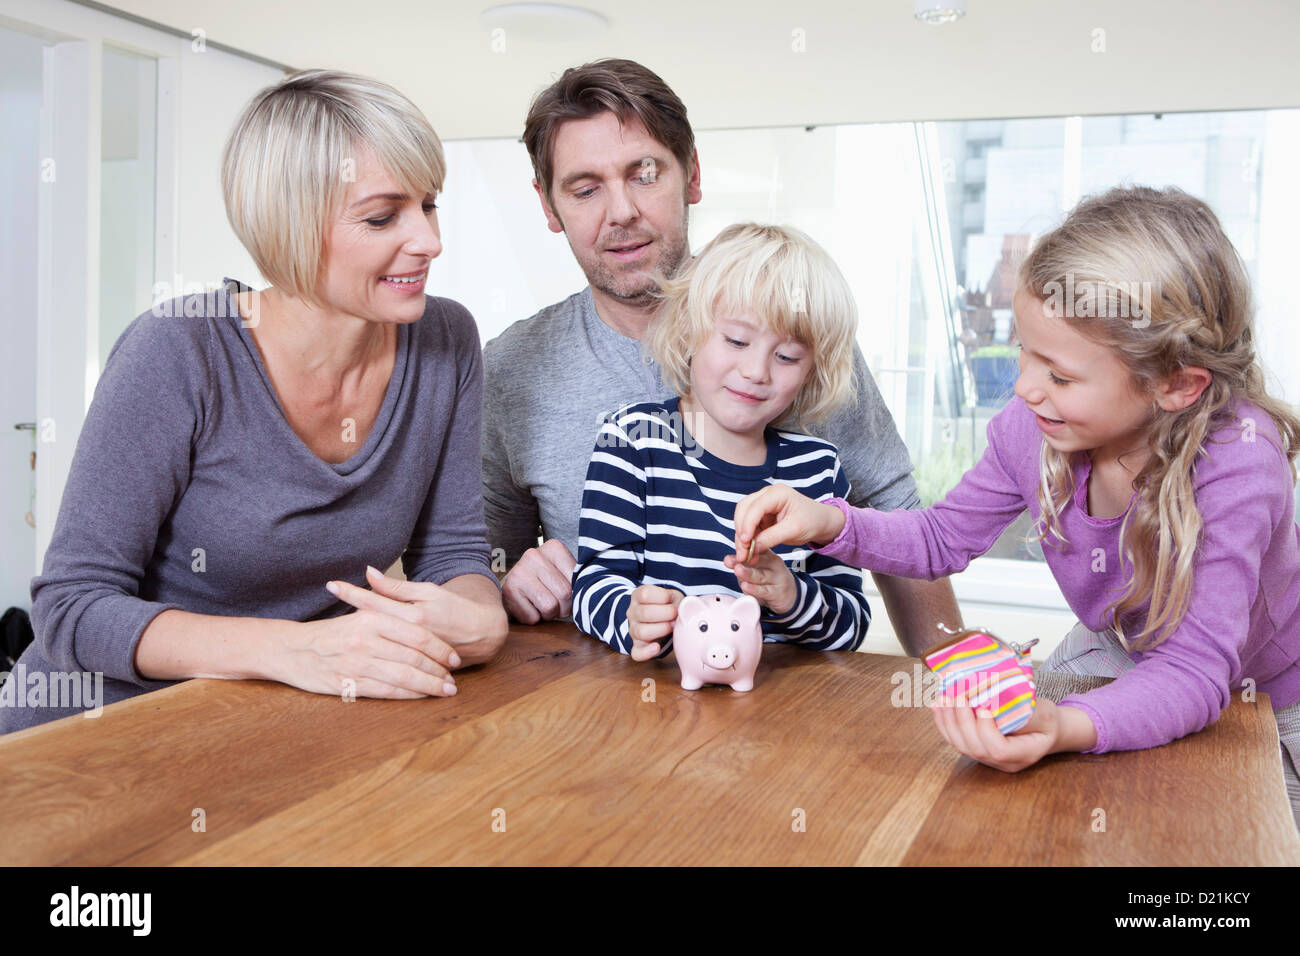 Germany, Bavaria, Munich, Child saving money in piggy bank while parents looking Stock Photo